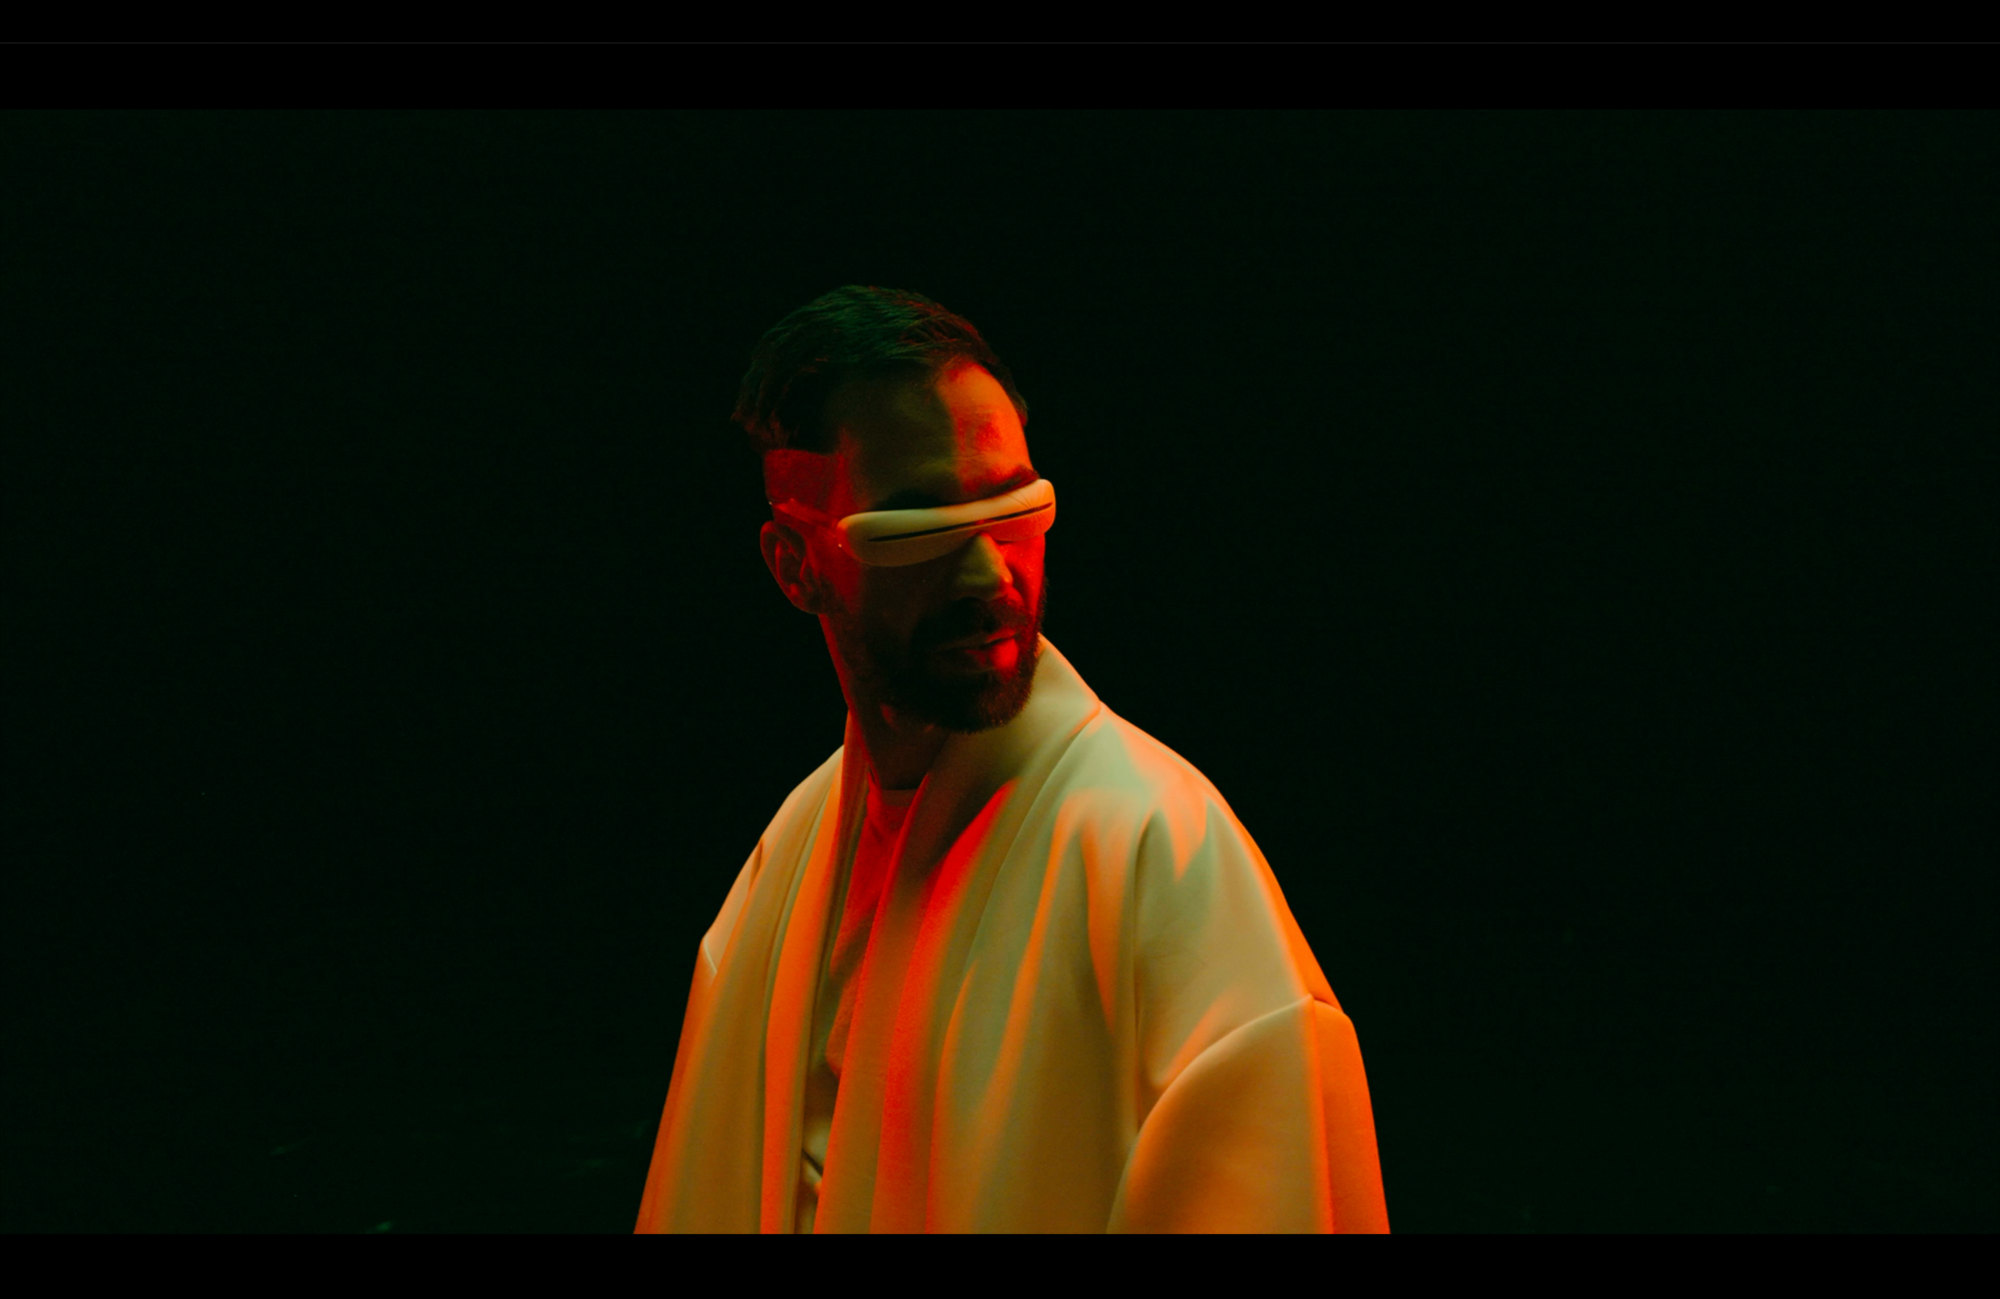 Fighting for attention in a white kimono - OIEE's latest video clip is released today